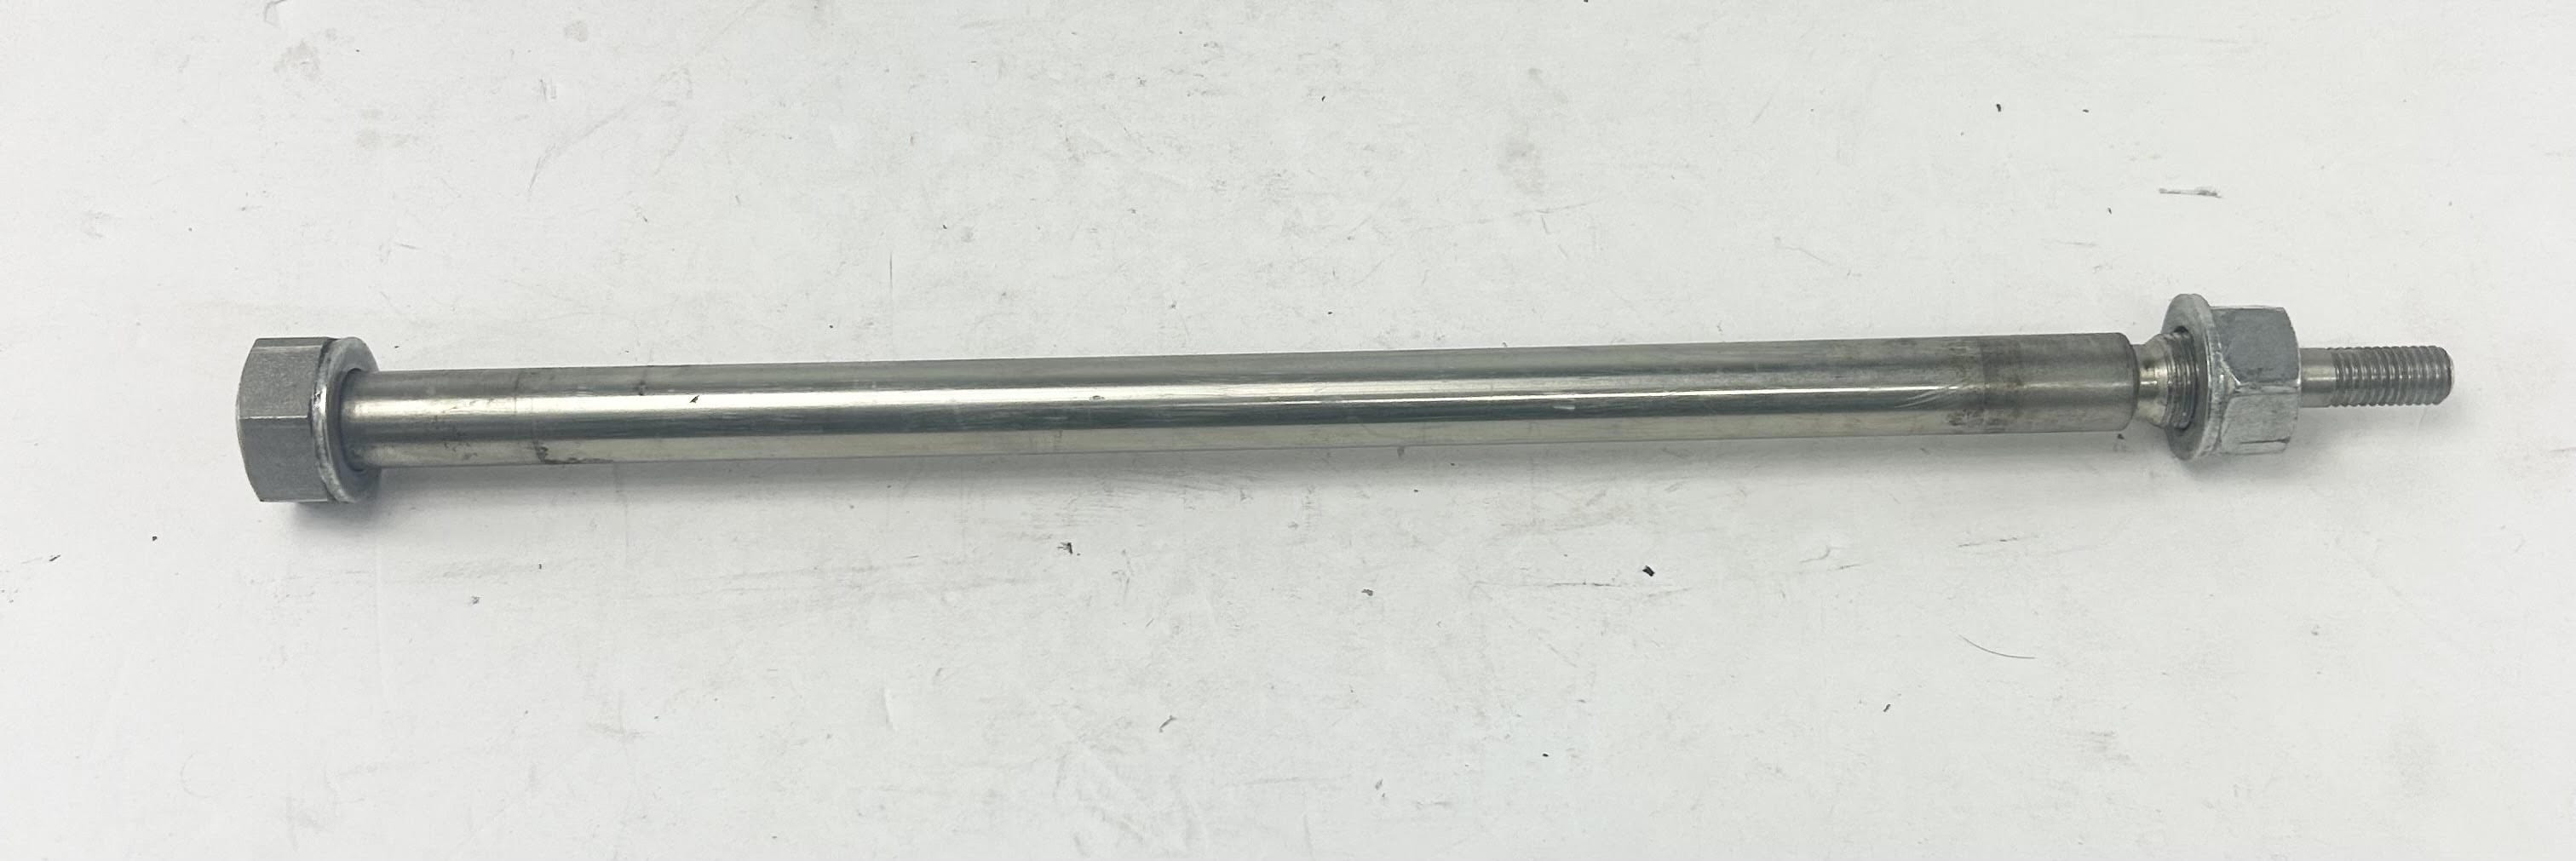 All American Wheels-Polaris Used Part 12" Front Axle by Polaris USED